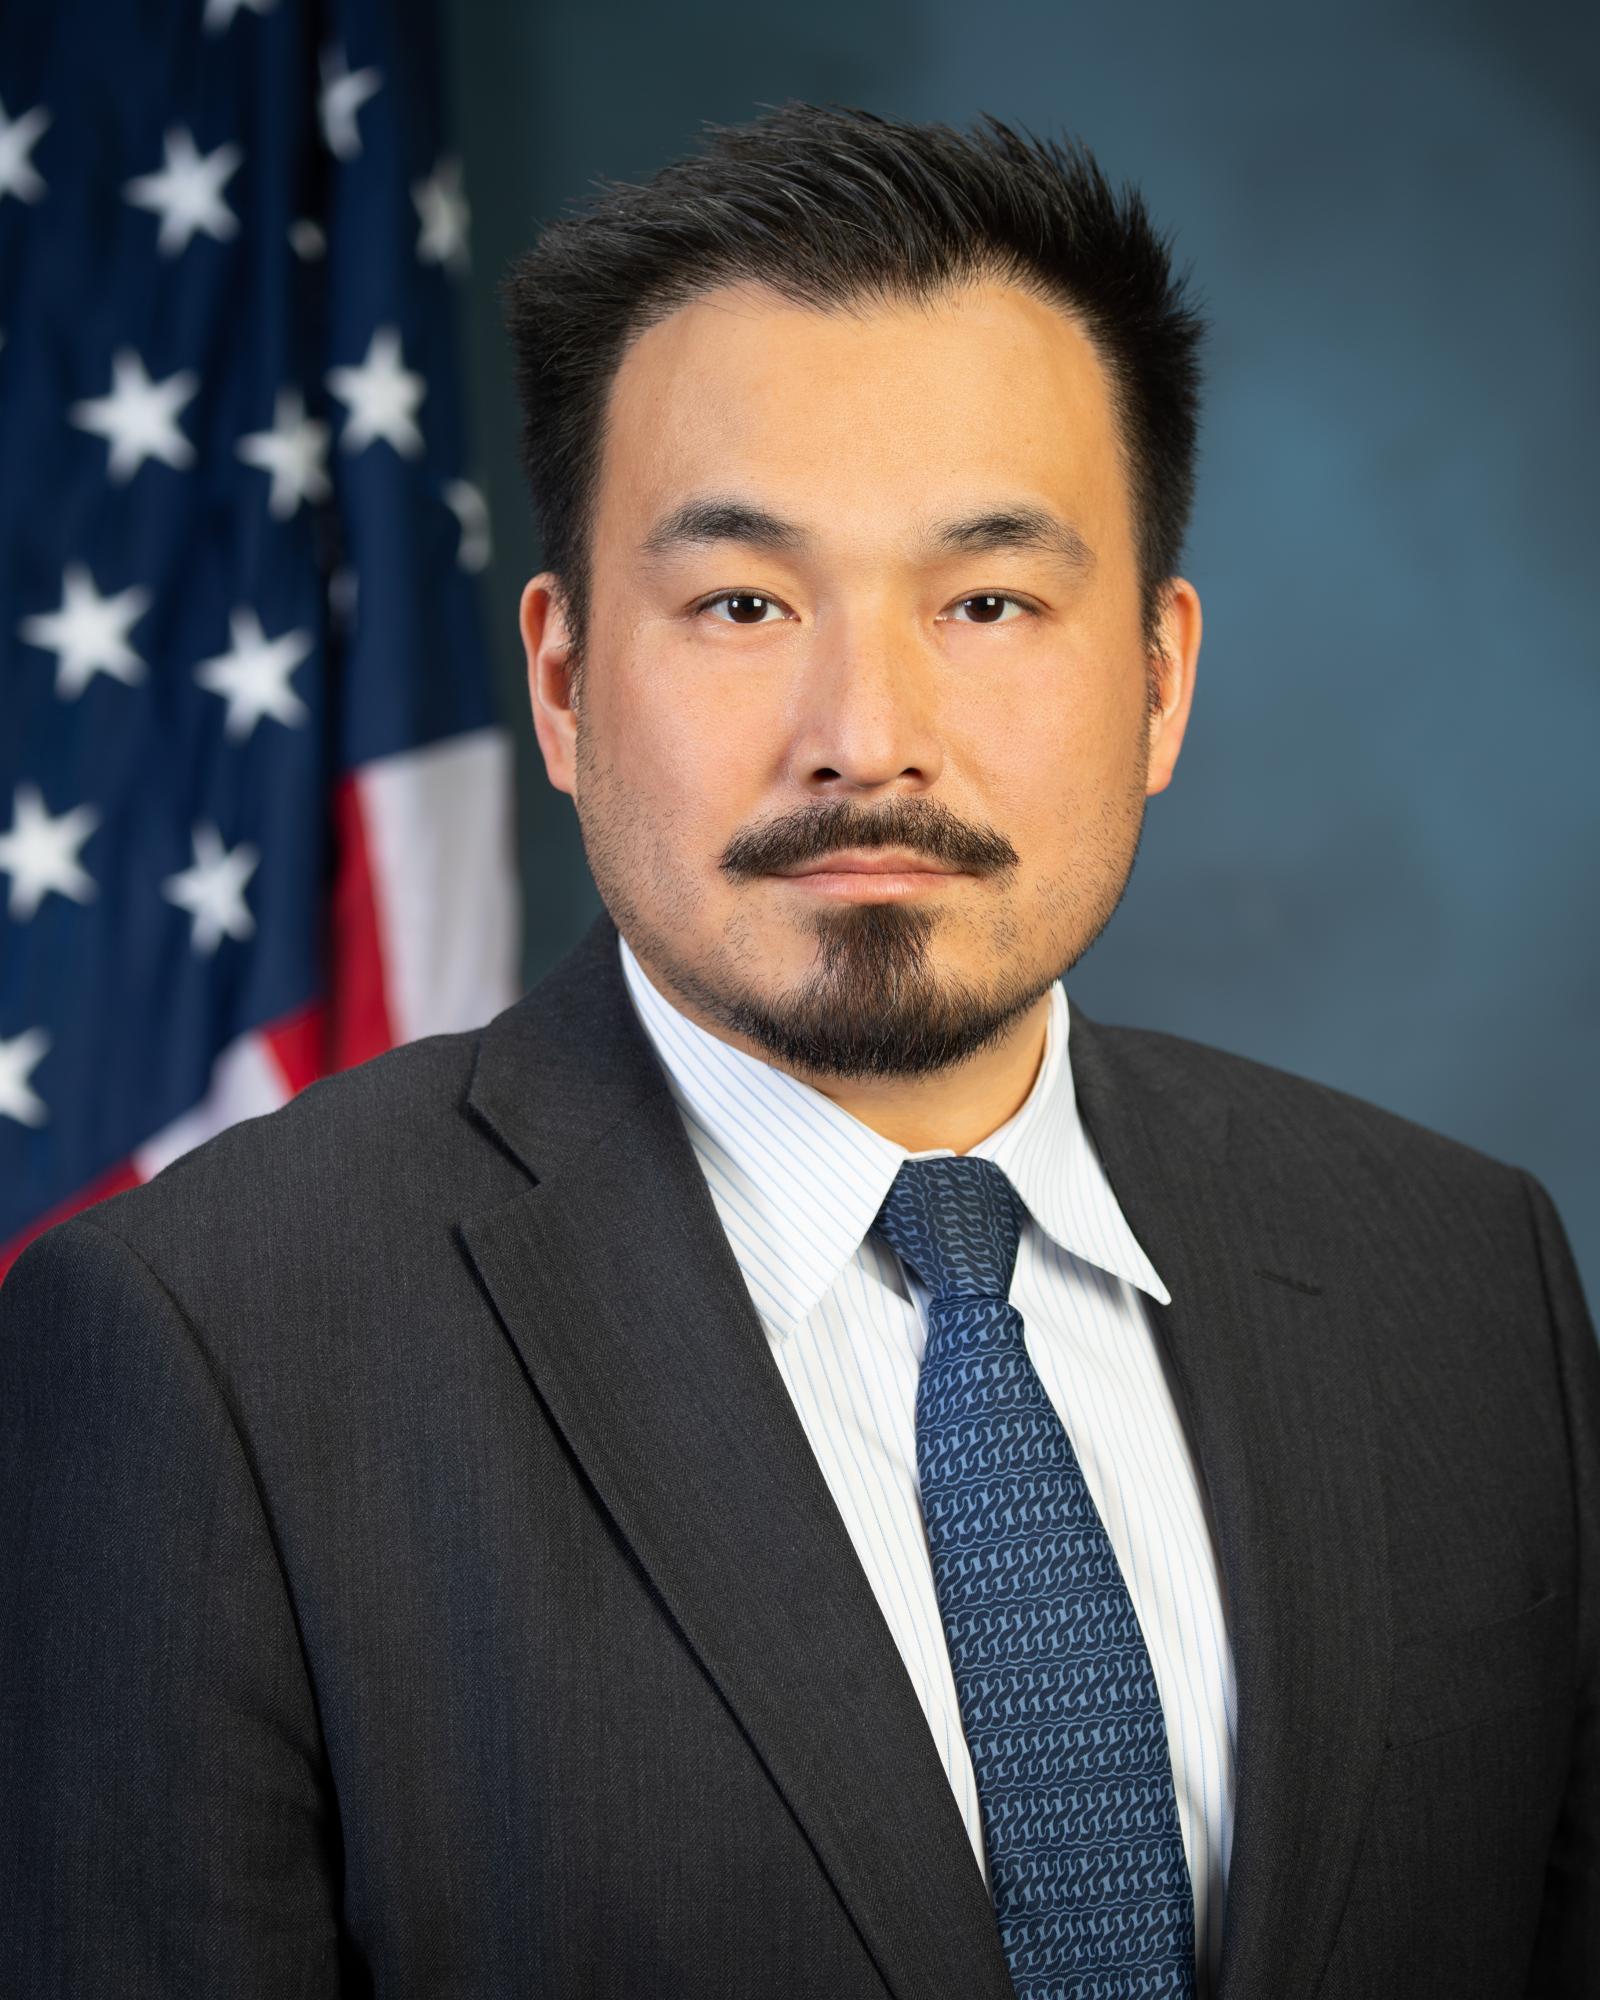 David Chow is the HUD CIO and is leading the new CoE IT modernization effort.